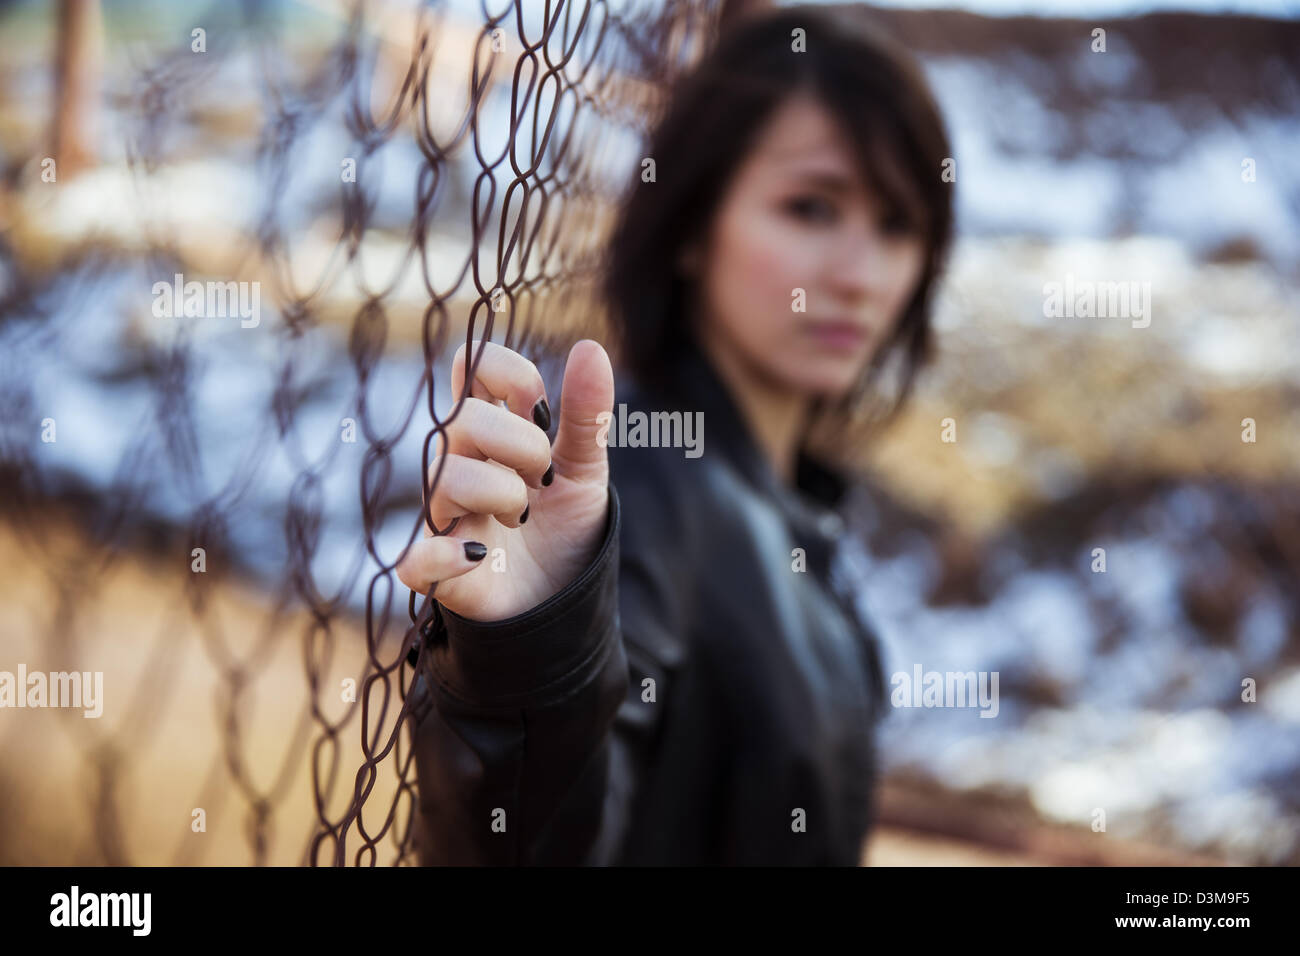 Young anonymous woman staring at camera. Stock Photo